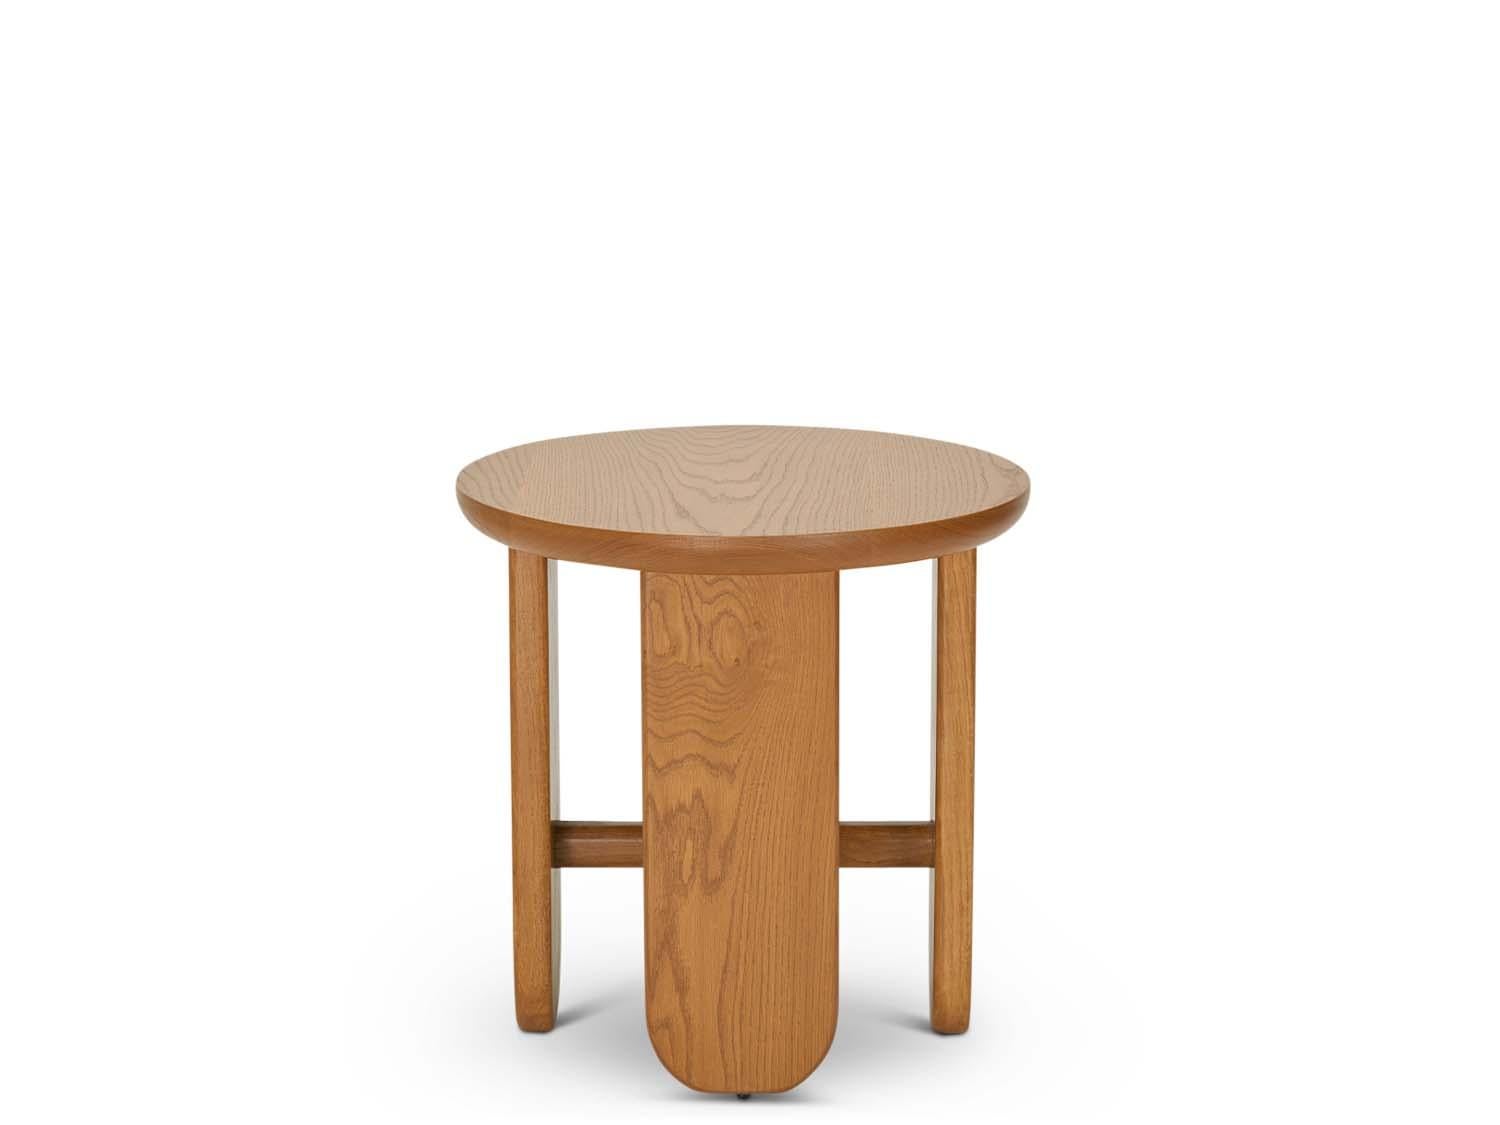 The Rainier End Table is part of the collaborative collection with interior designer Brian Paquette. The Rainier End Table features a solid wood top and four pedestal legs connected with a solid wood stretcher.

The Lawson-Fenning Collection is